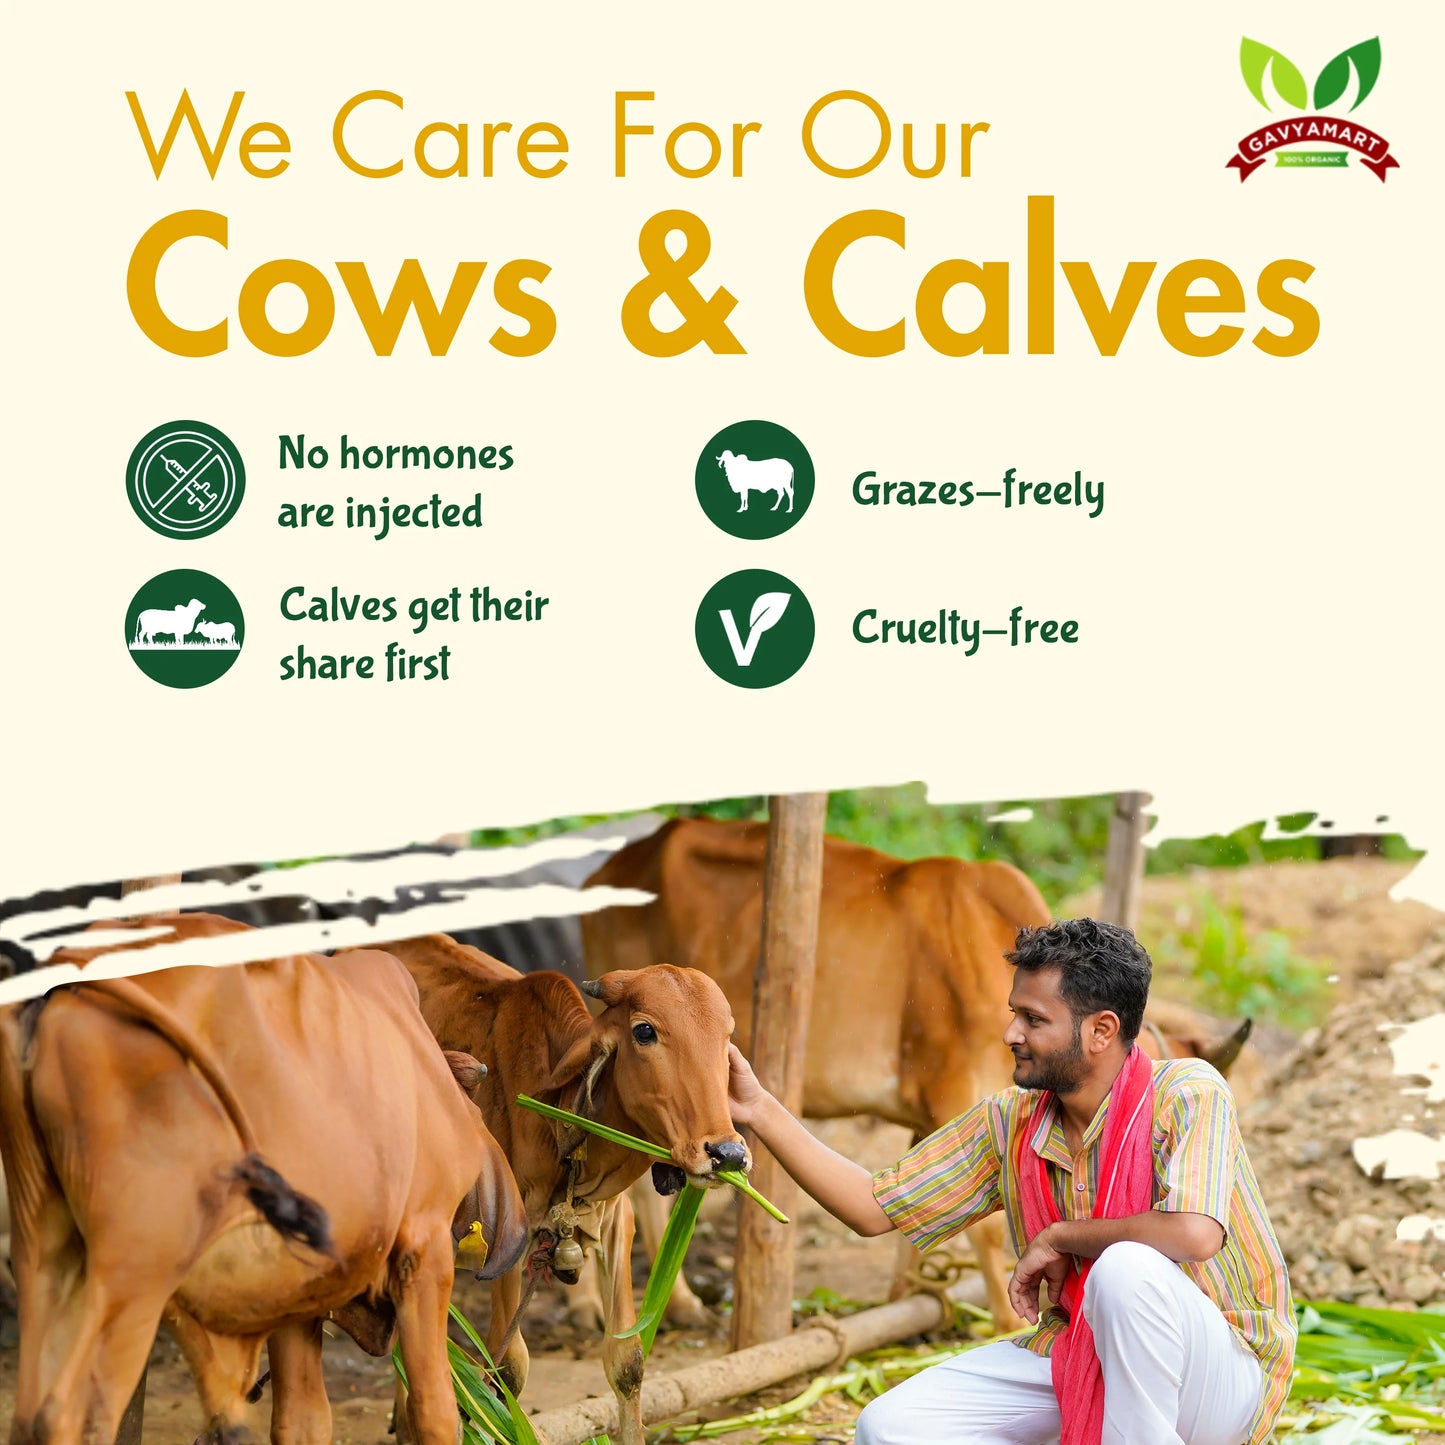 We Care For Our Cows & Calves